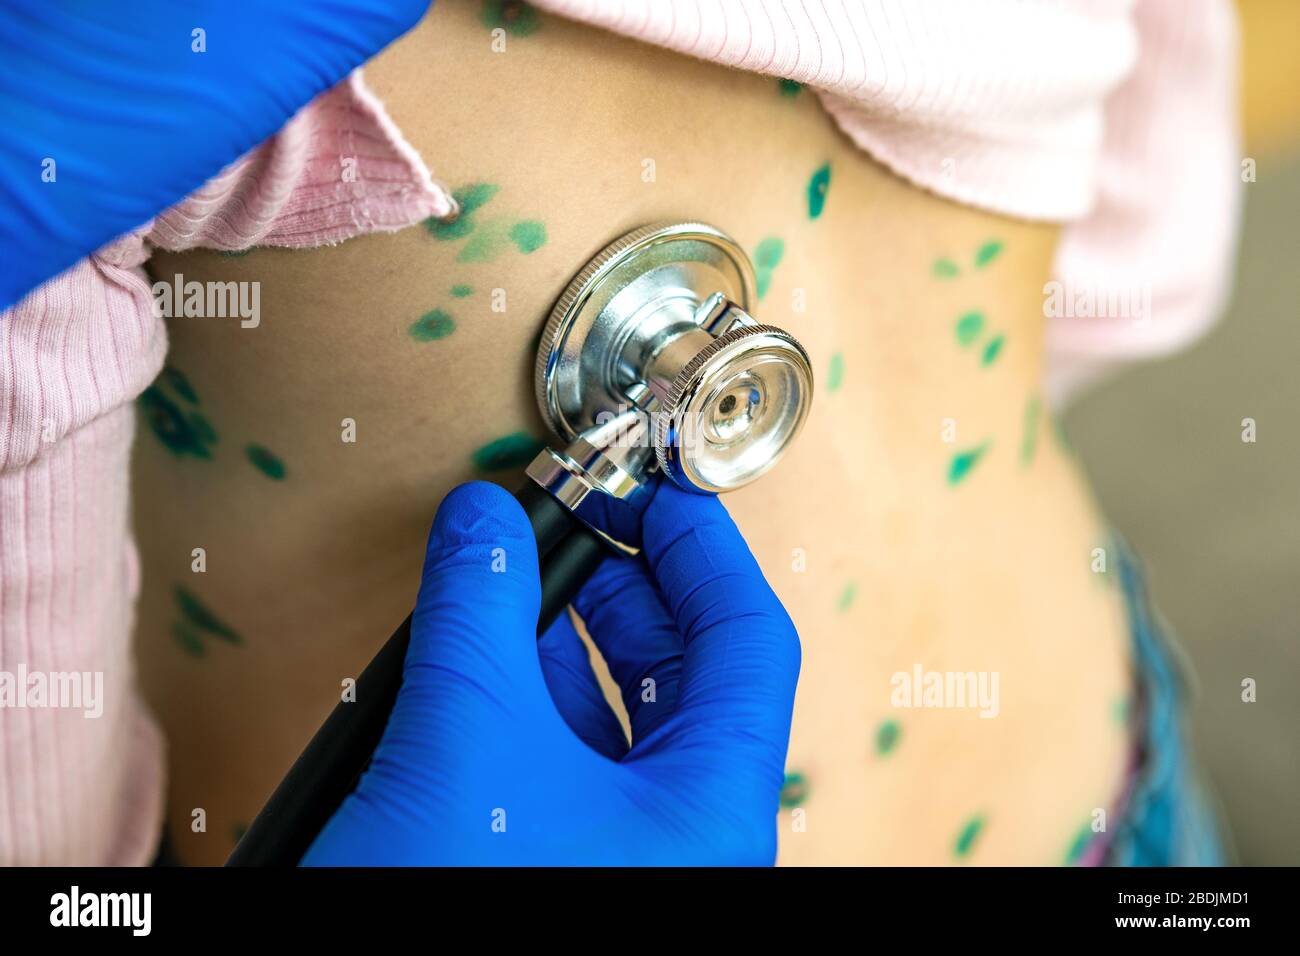 Doctor examining a child with stethoscope covered with green rashes on back ill with chickenpox, measles or rubella virus. Stock Photo